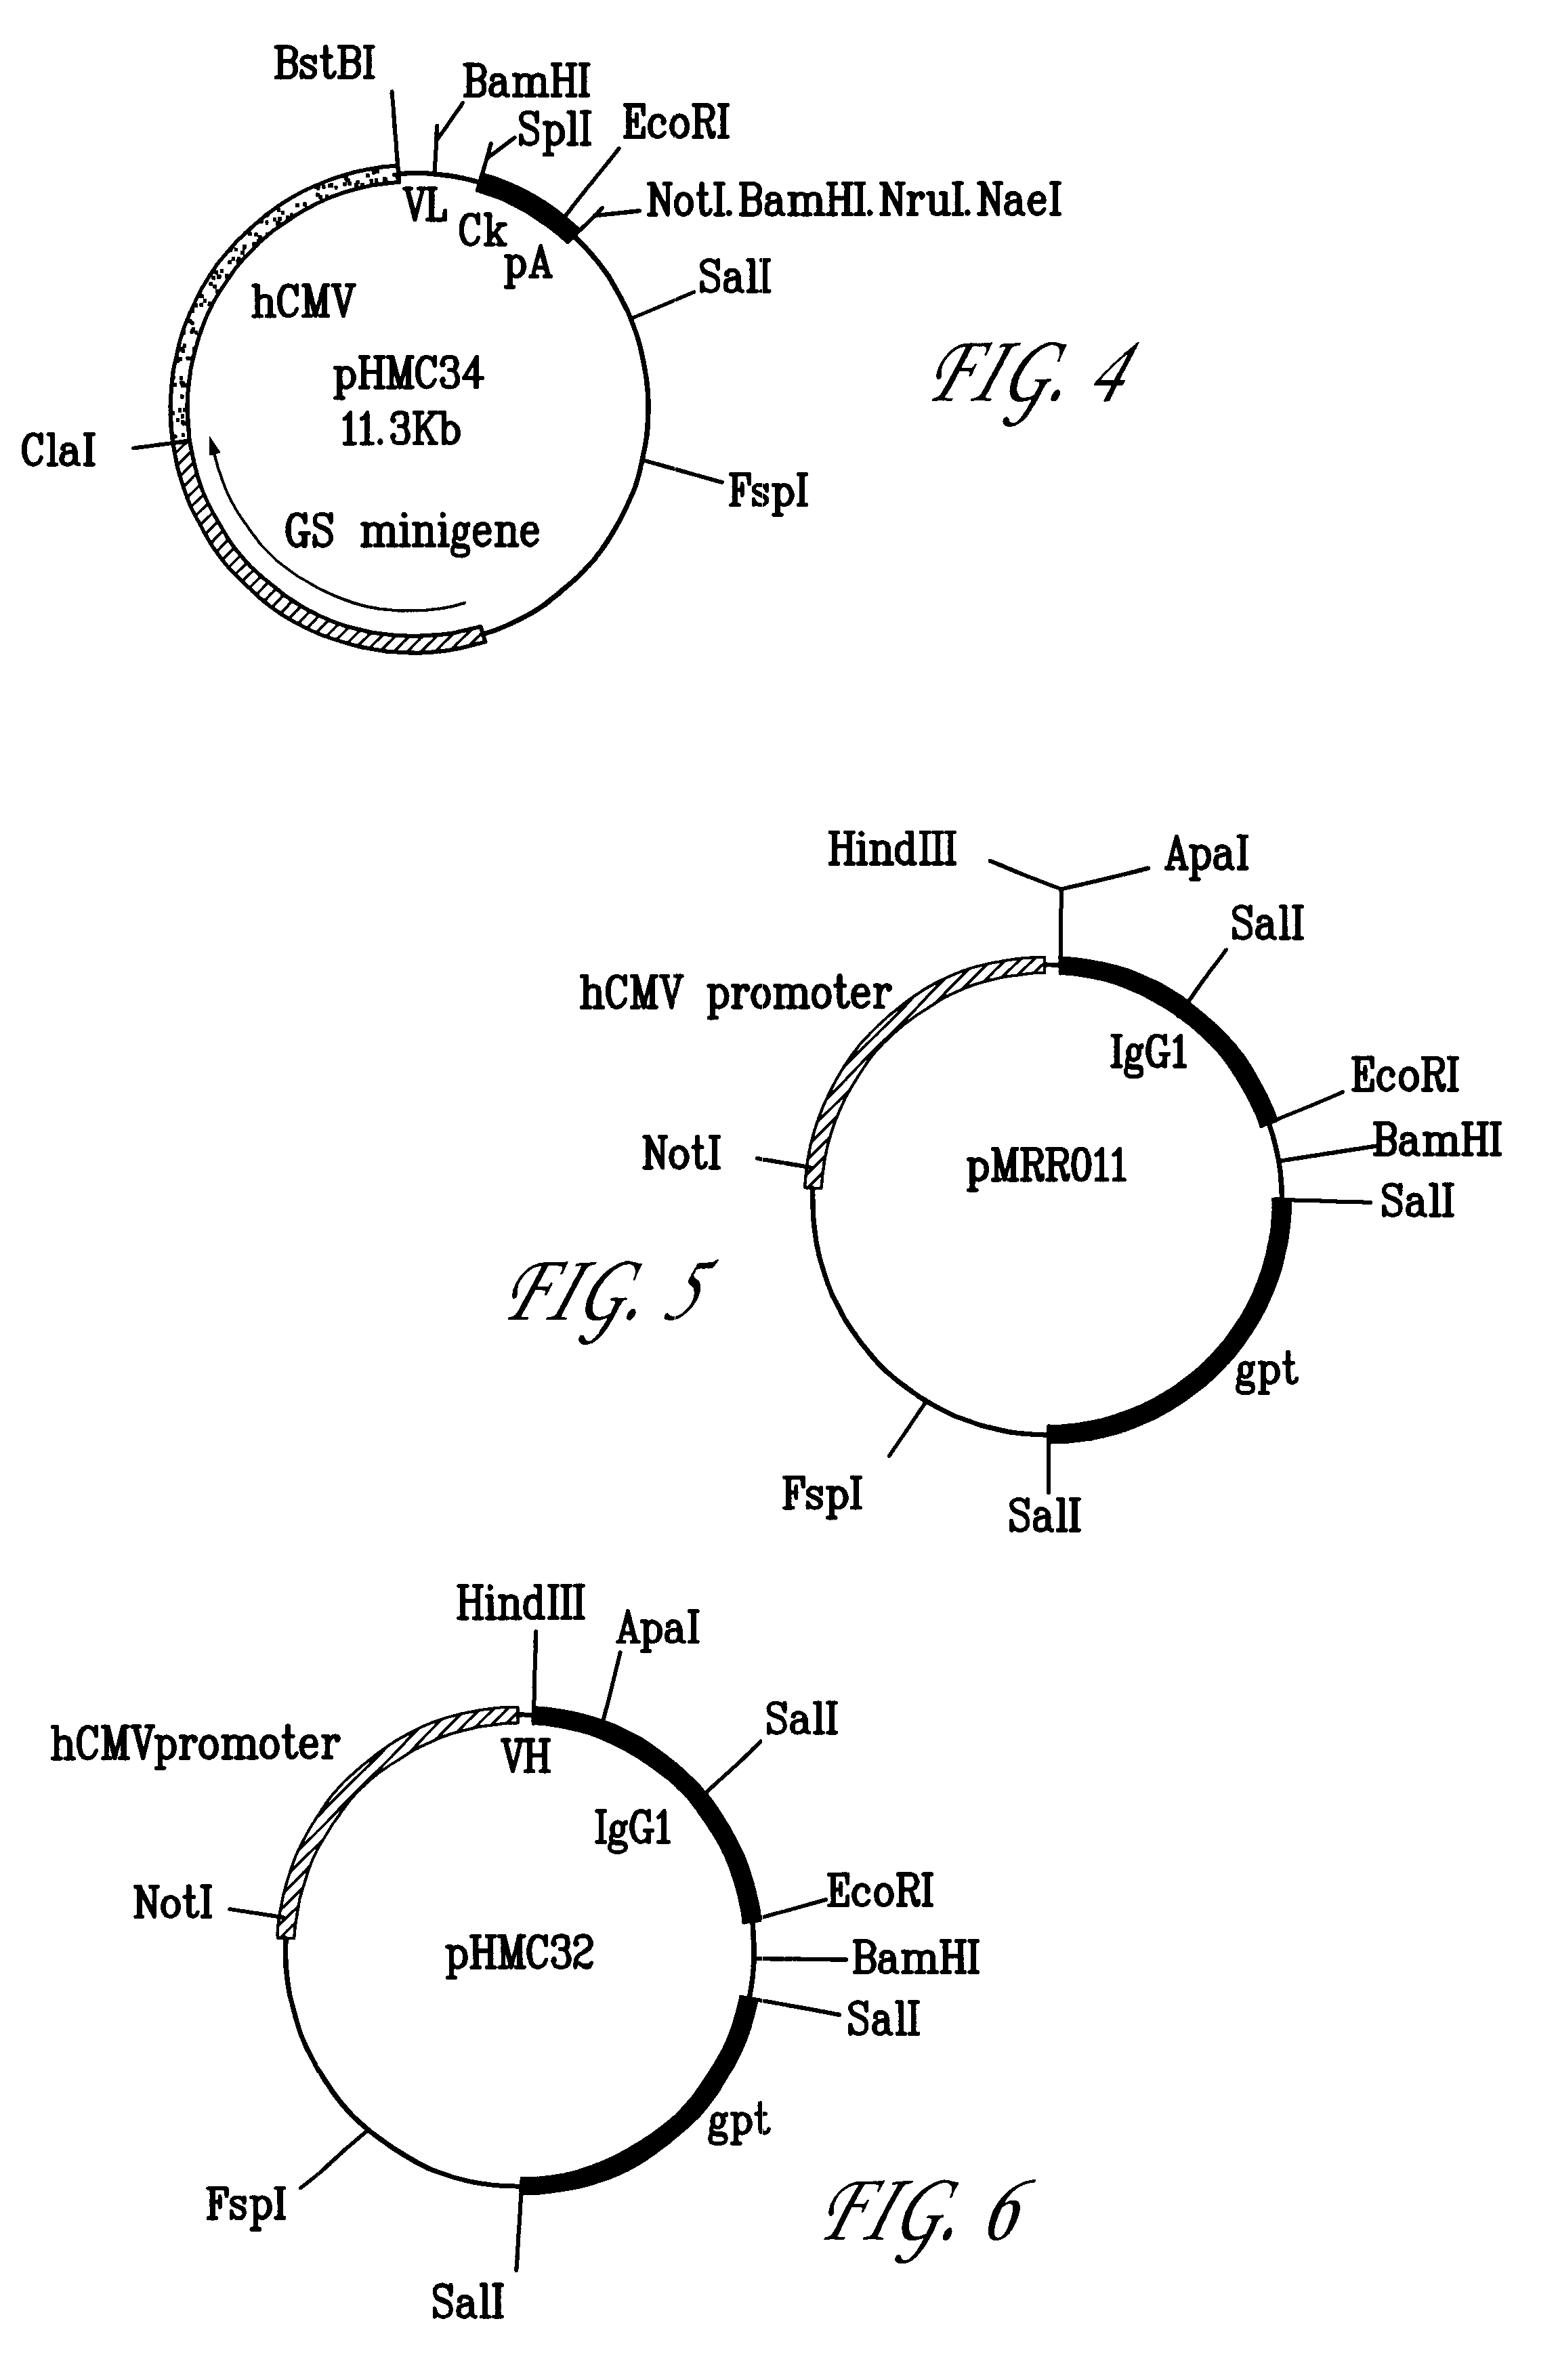 Anti-HMFG antibodies and processes for their production